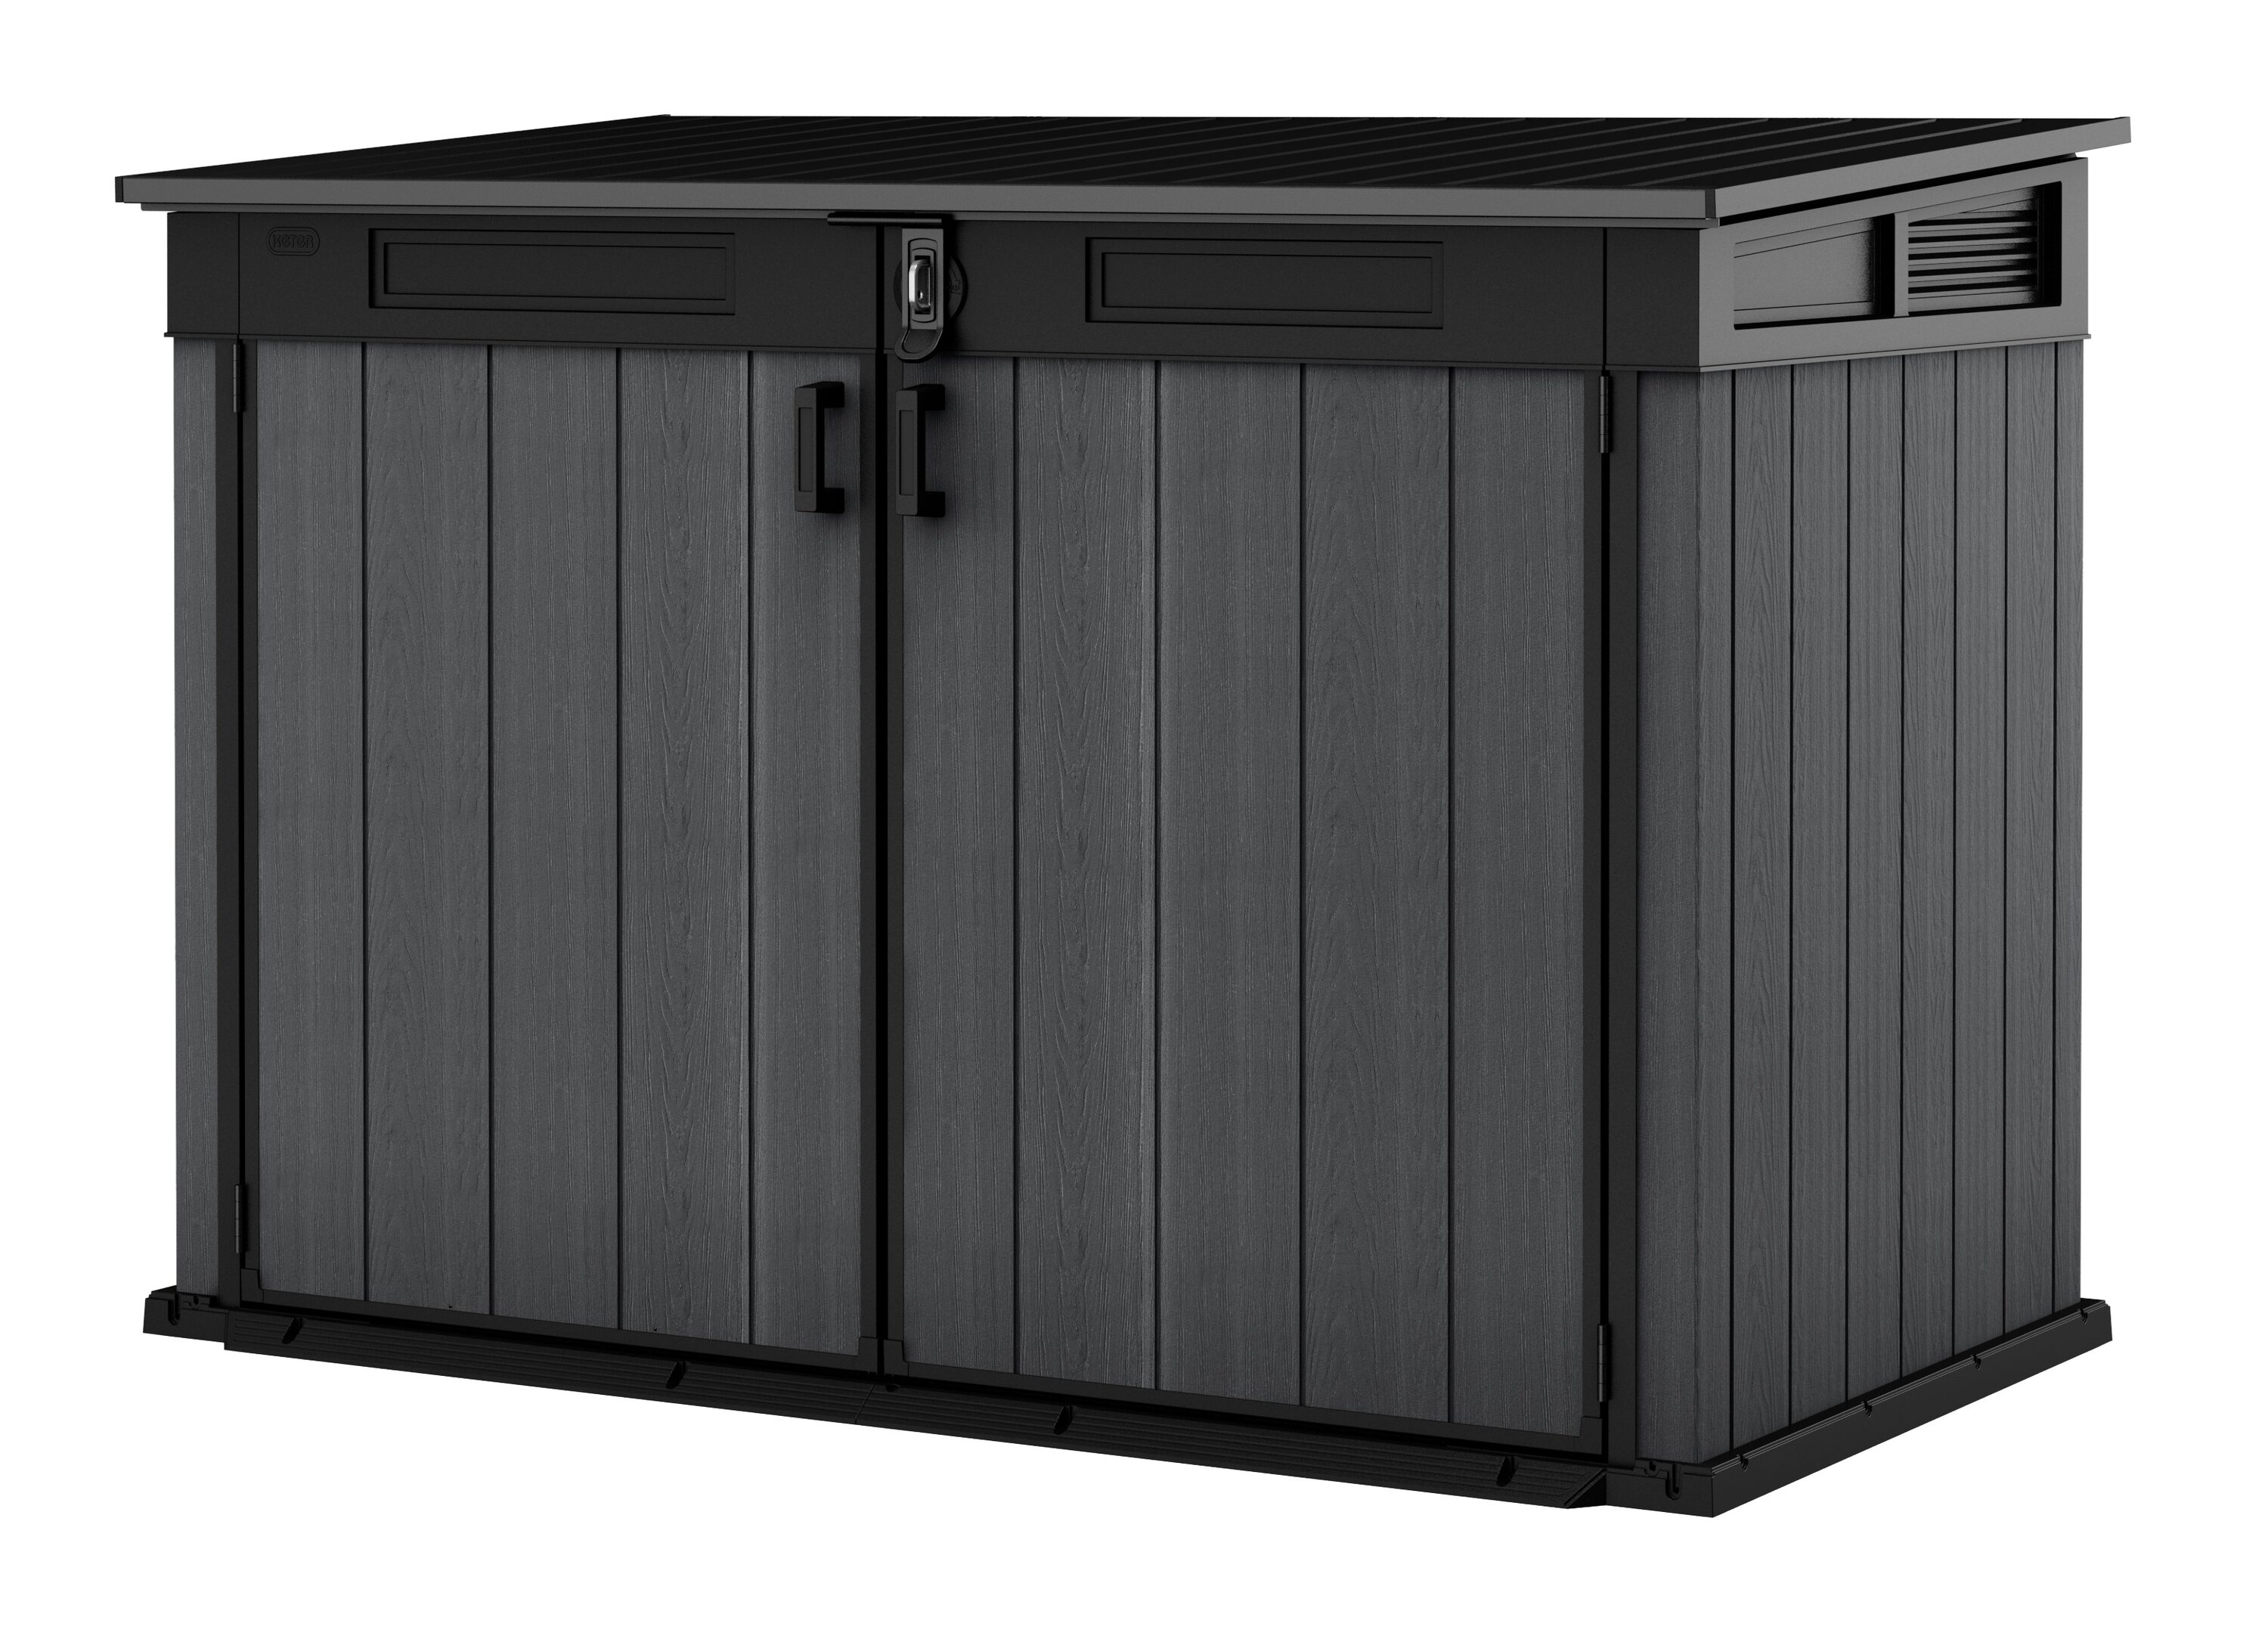 Keter 6.25-ft x Cortina Resin Storage Shed (Floor Included) in Vinyl & Resin Sheds at Lowes.com